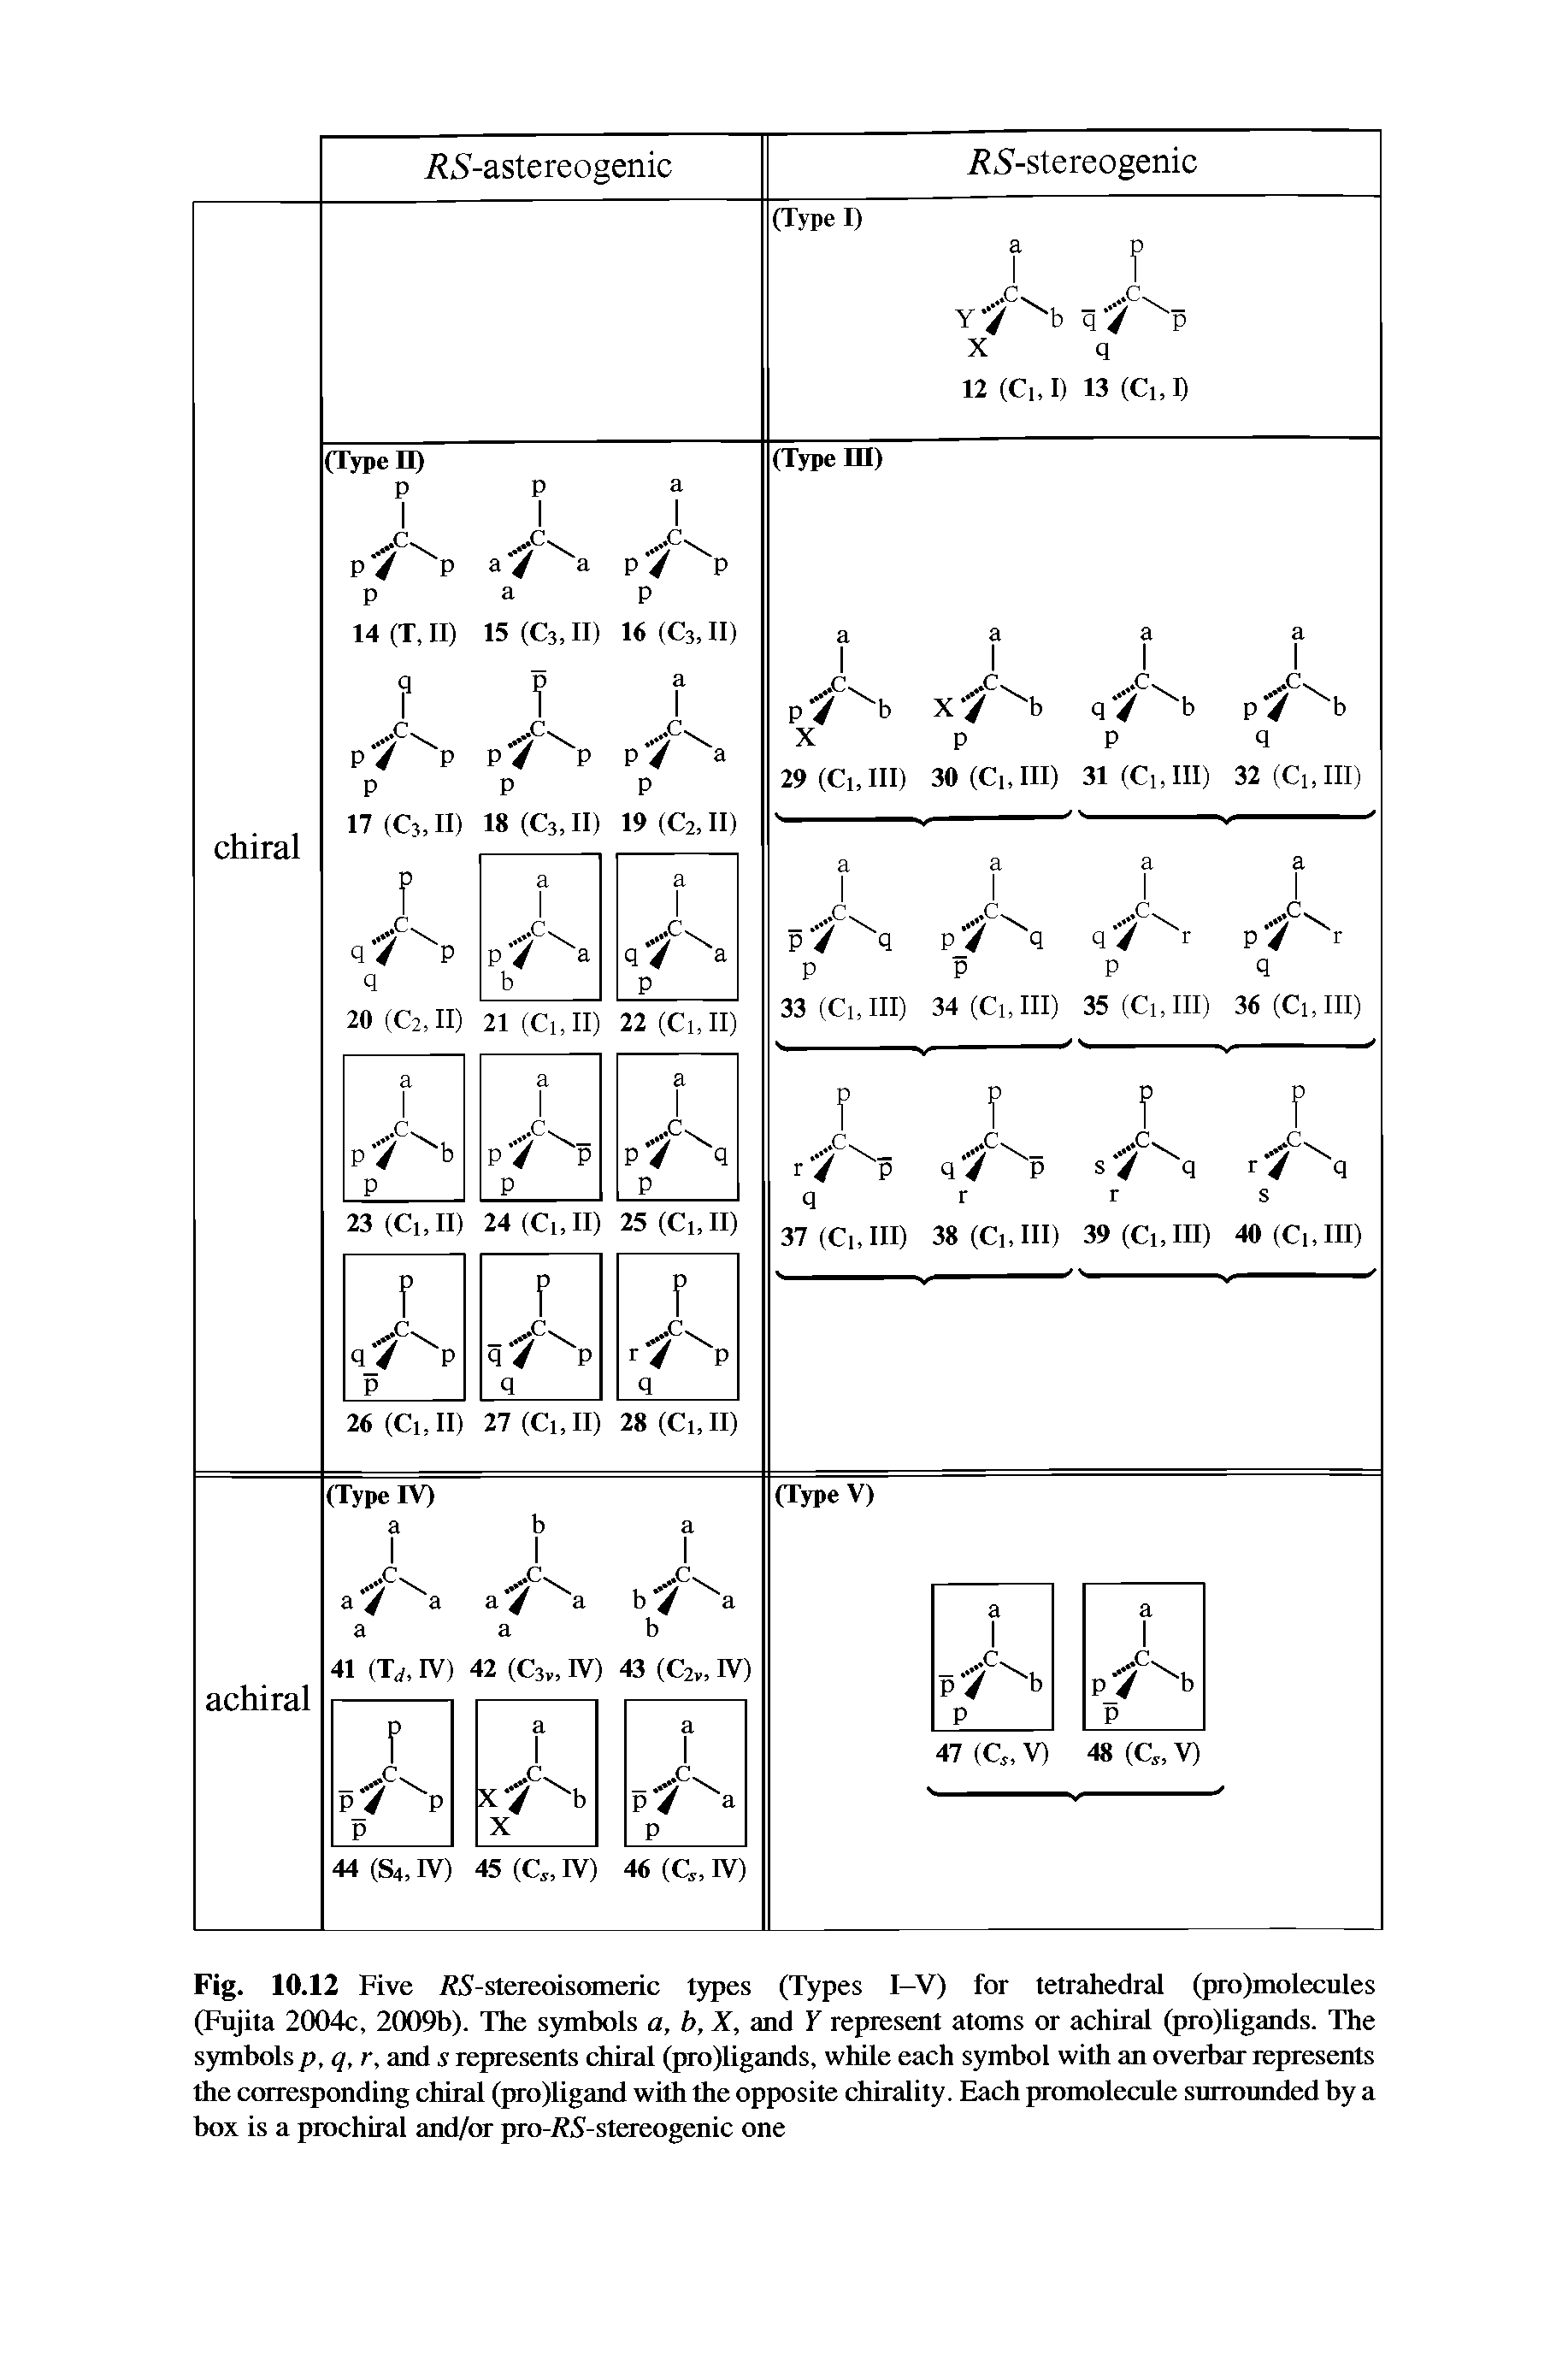 Fig. 10.12 Five /f5-stereoisomeric types (Types I-V) for tetrahedral (pro)molecules (Fujita 2004c, 2009b). The symbols a, b, X, and Y represent atoms or achiral (pro)ligands. The symbols p,q,r, and s represents chiral (pro)ligands, while each symbol with an overbar represents the corresponding chiral (pro)ligand with the opposite chirality. Each promolecule surrounded by a box is a prochiral and/OT pro-/fS-stereogenic one...